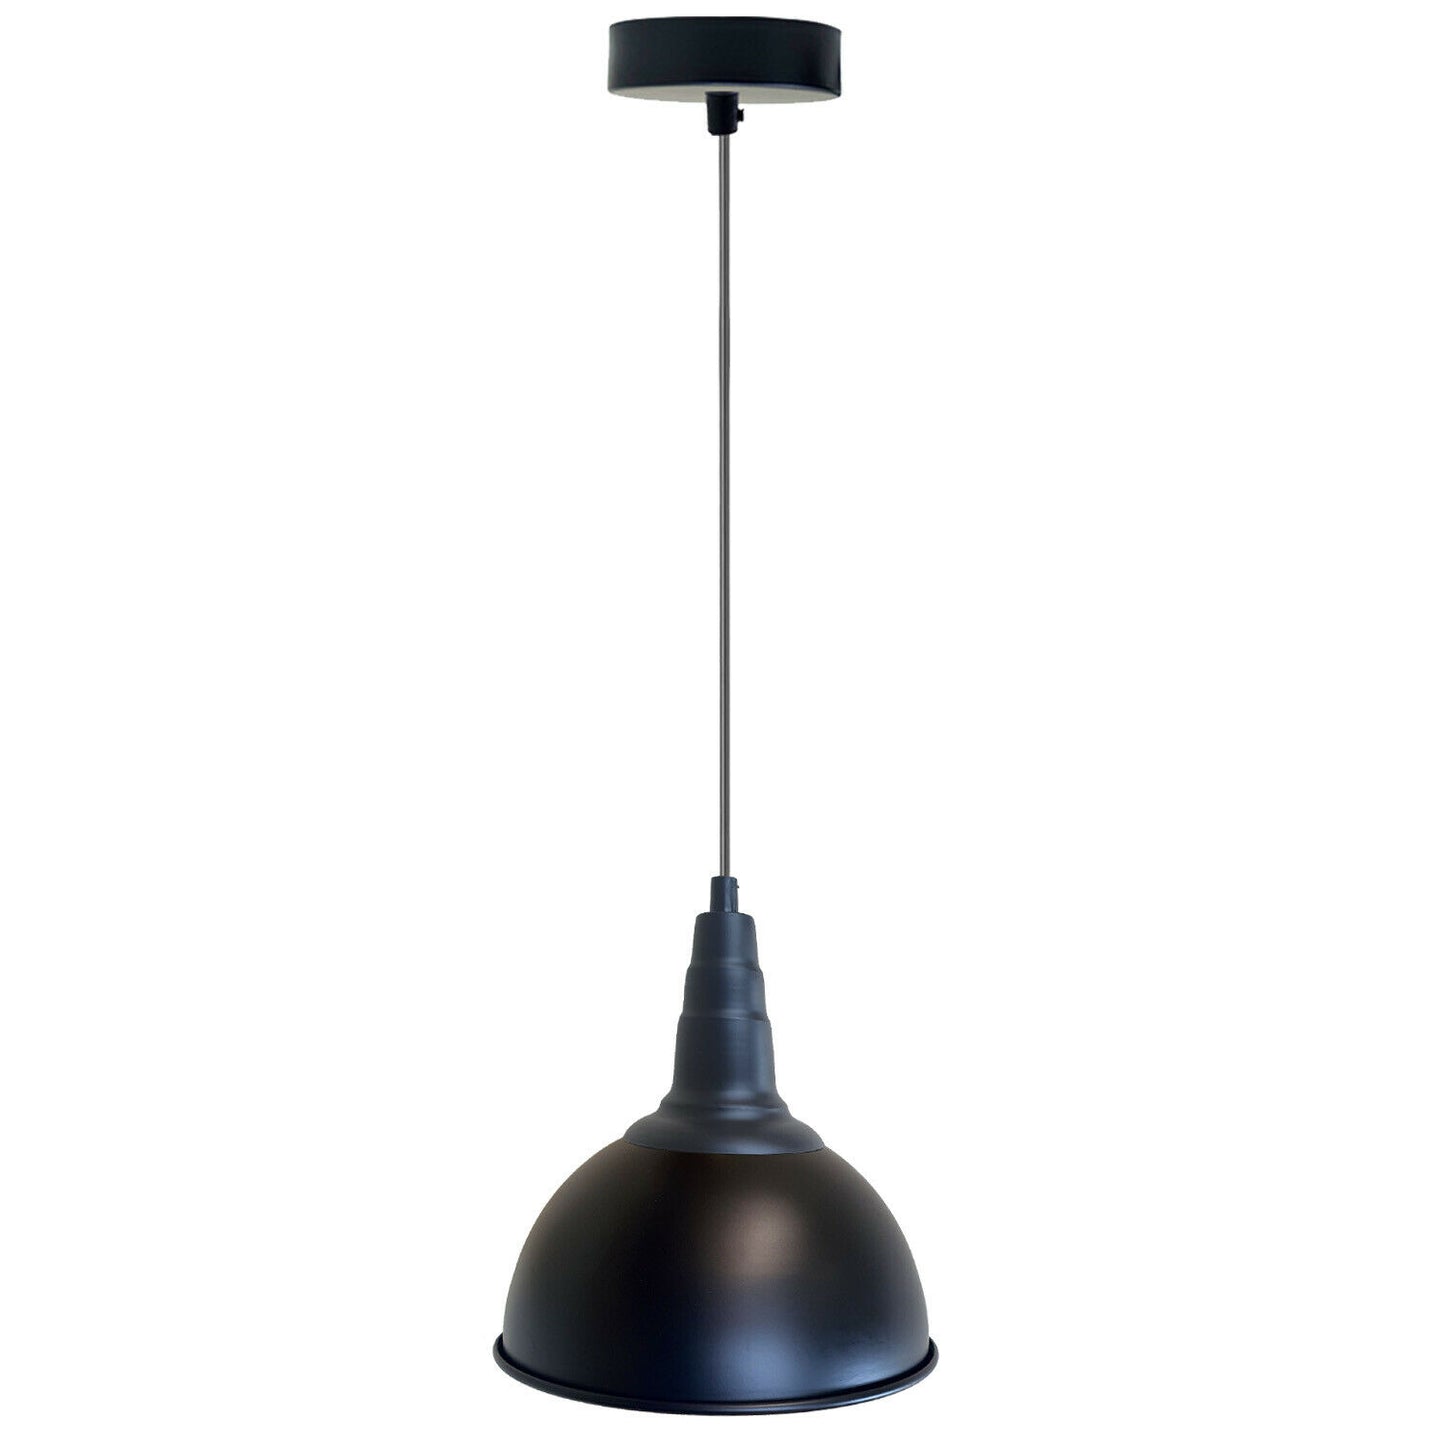 Black Vintage Style Dome Shade Hanging Ceiling Pendant Light